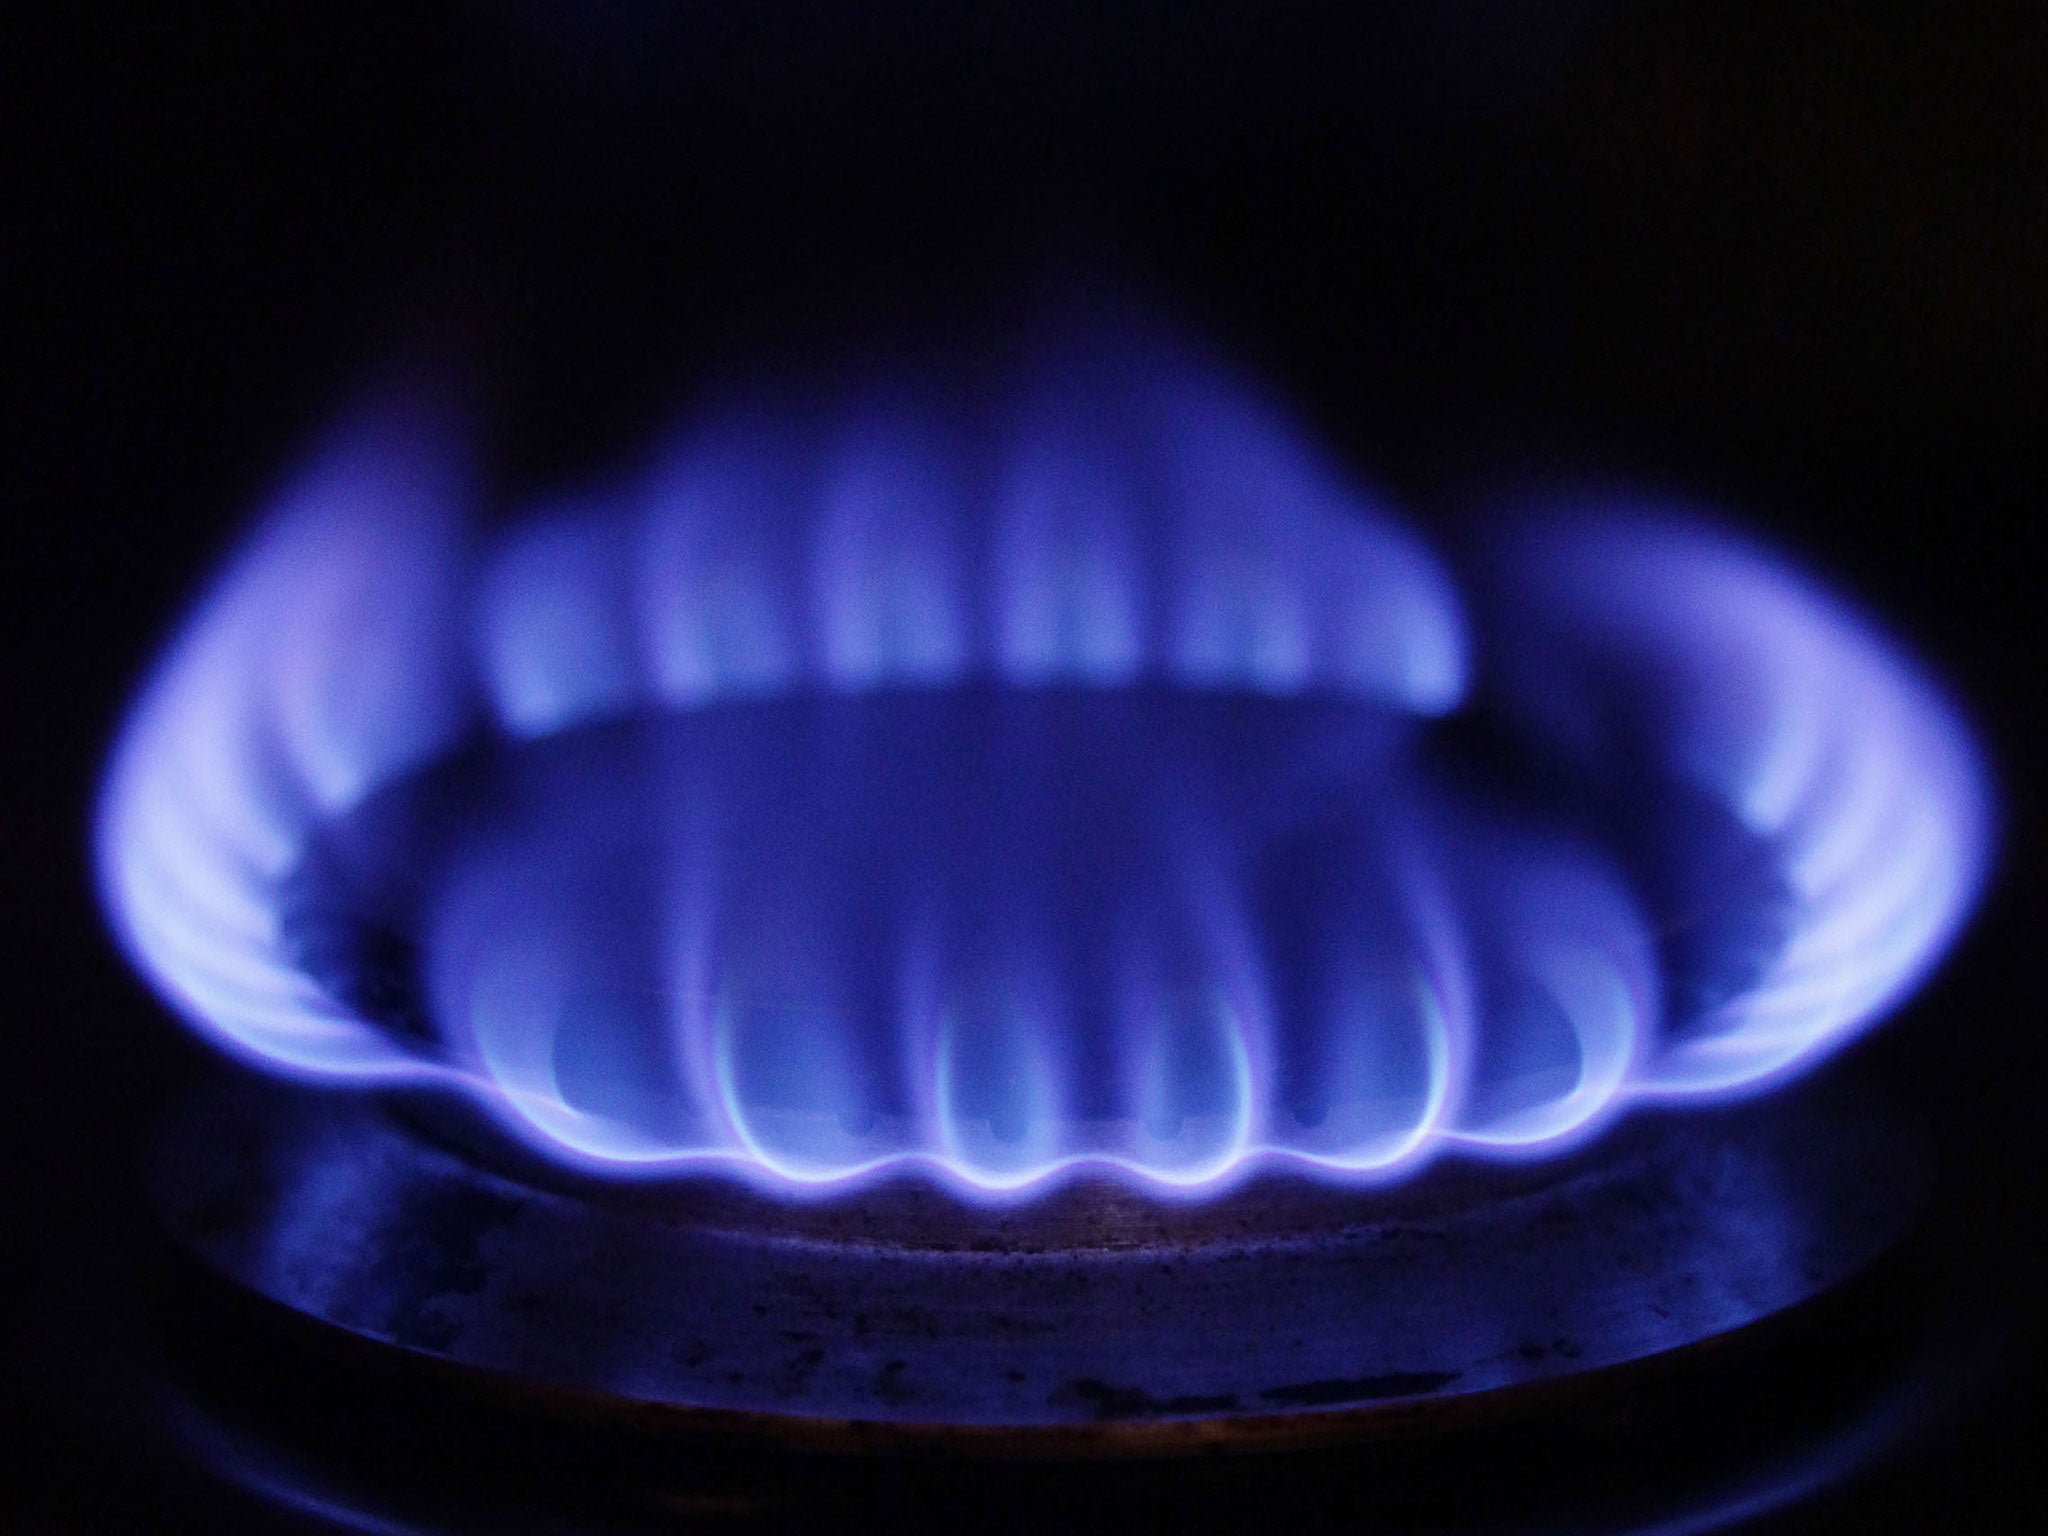 Energy regulator Ofgem will introduce its much vaunted price capping regime on 1 January